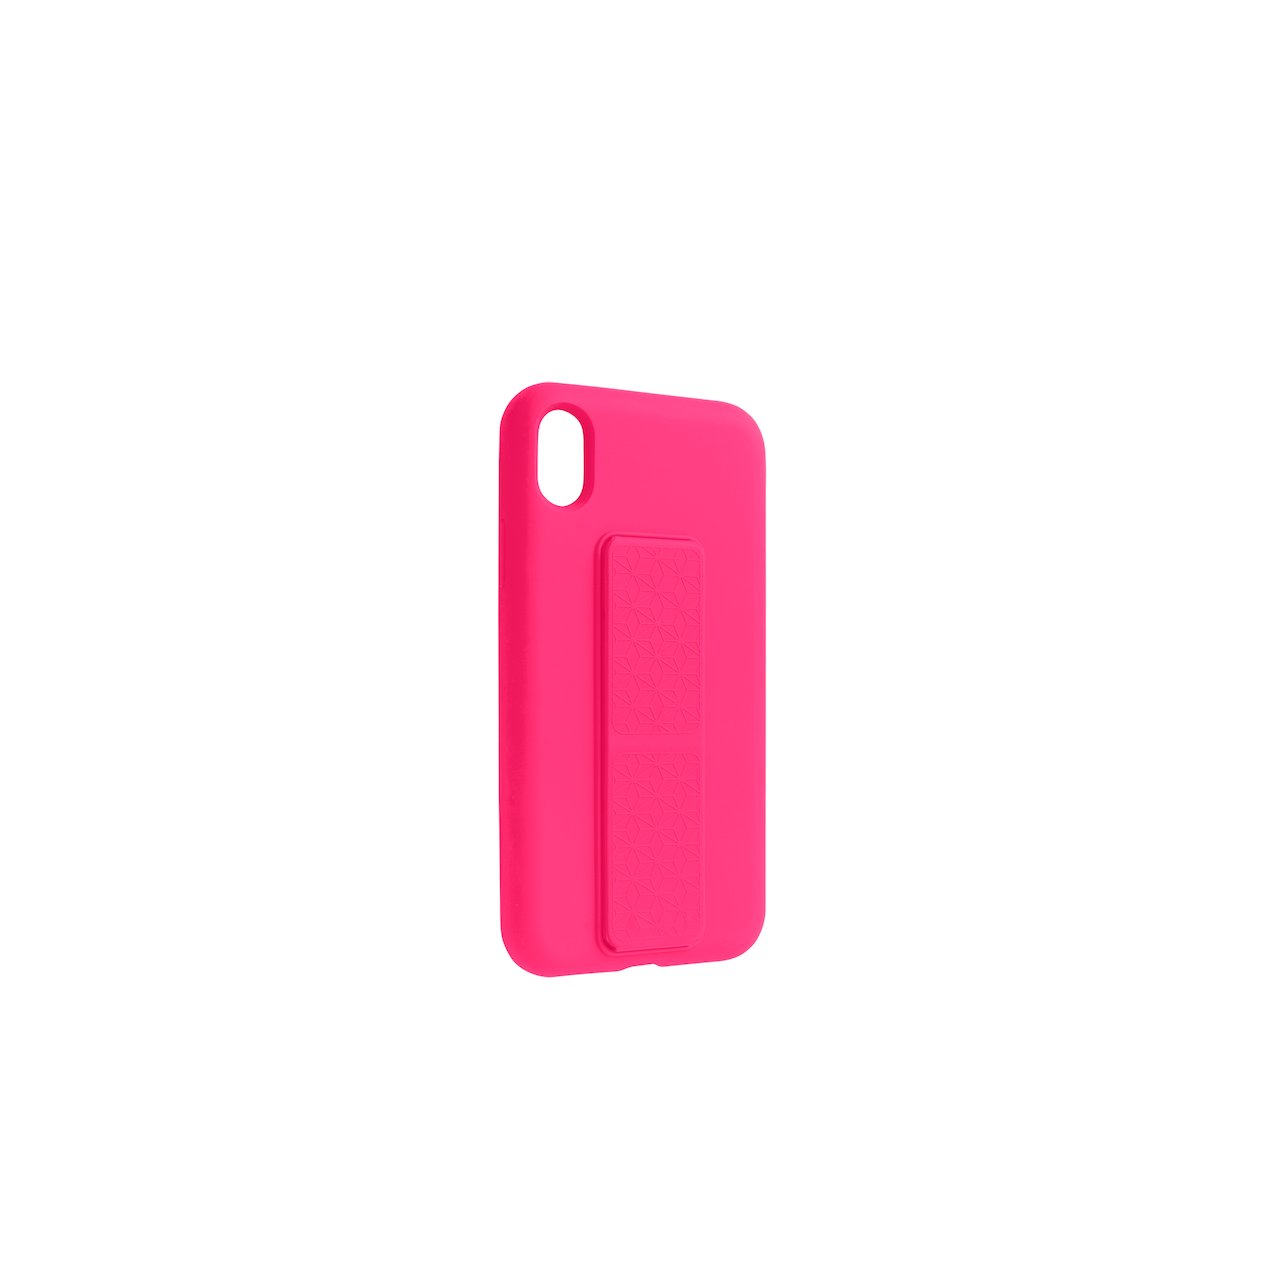 LEKI BYCPH COVER IPHONE X/XS GRIP AND STAND SIIKON ROSA